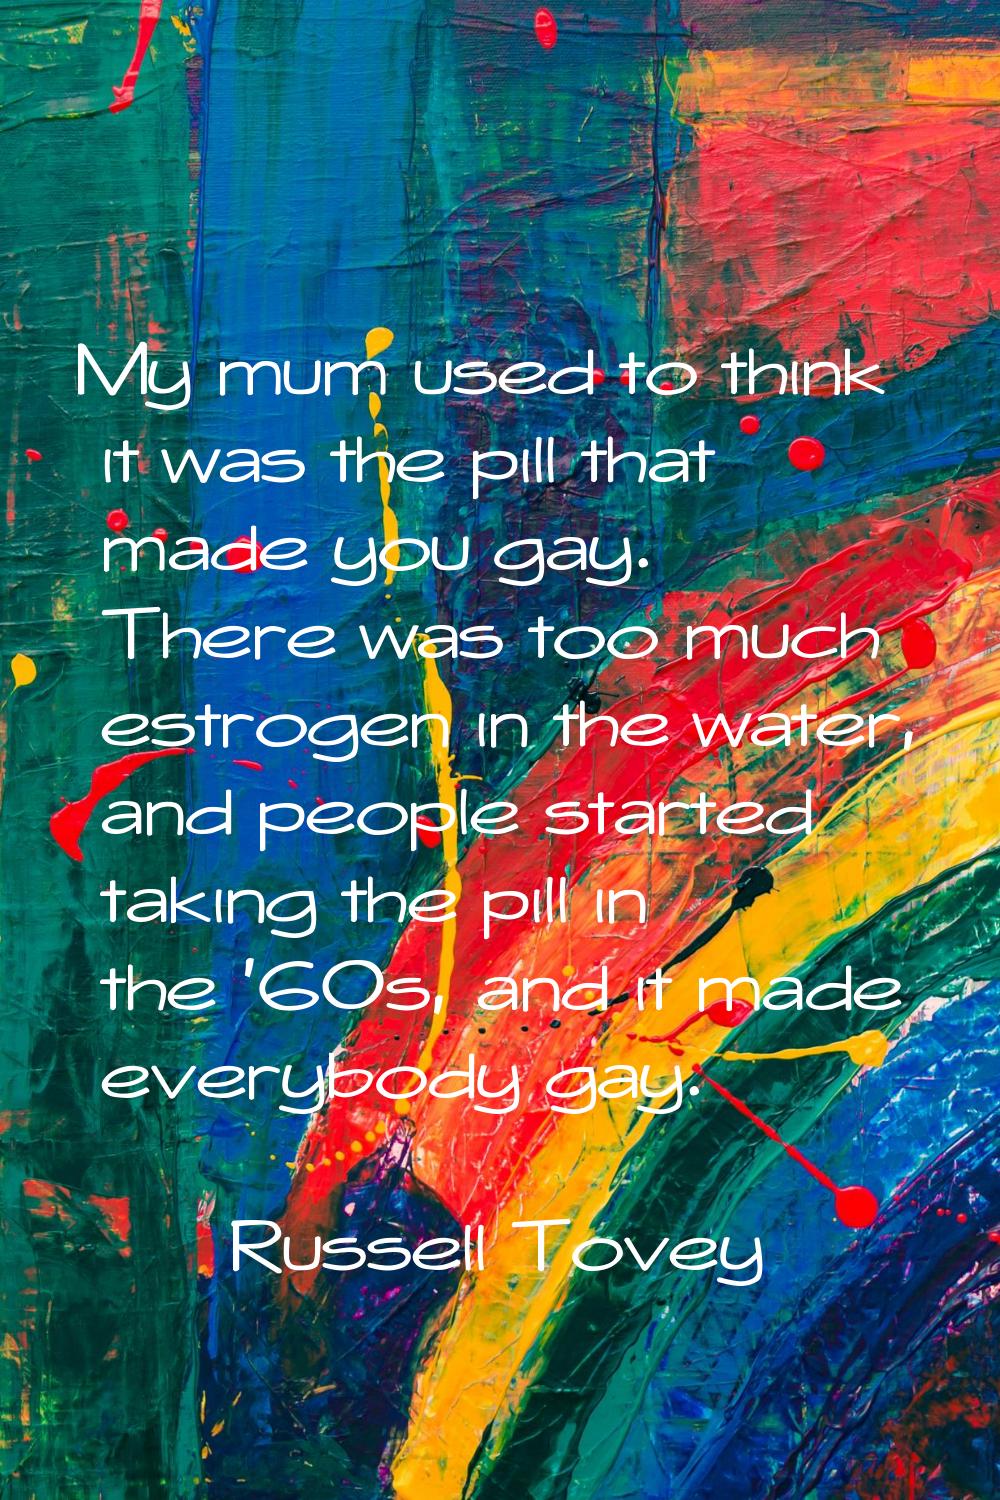 My mum used to think it was the pill that made you gay. There was too much estrogen in the water, a